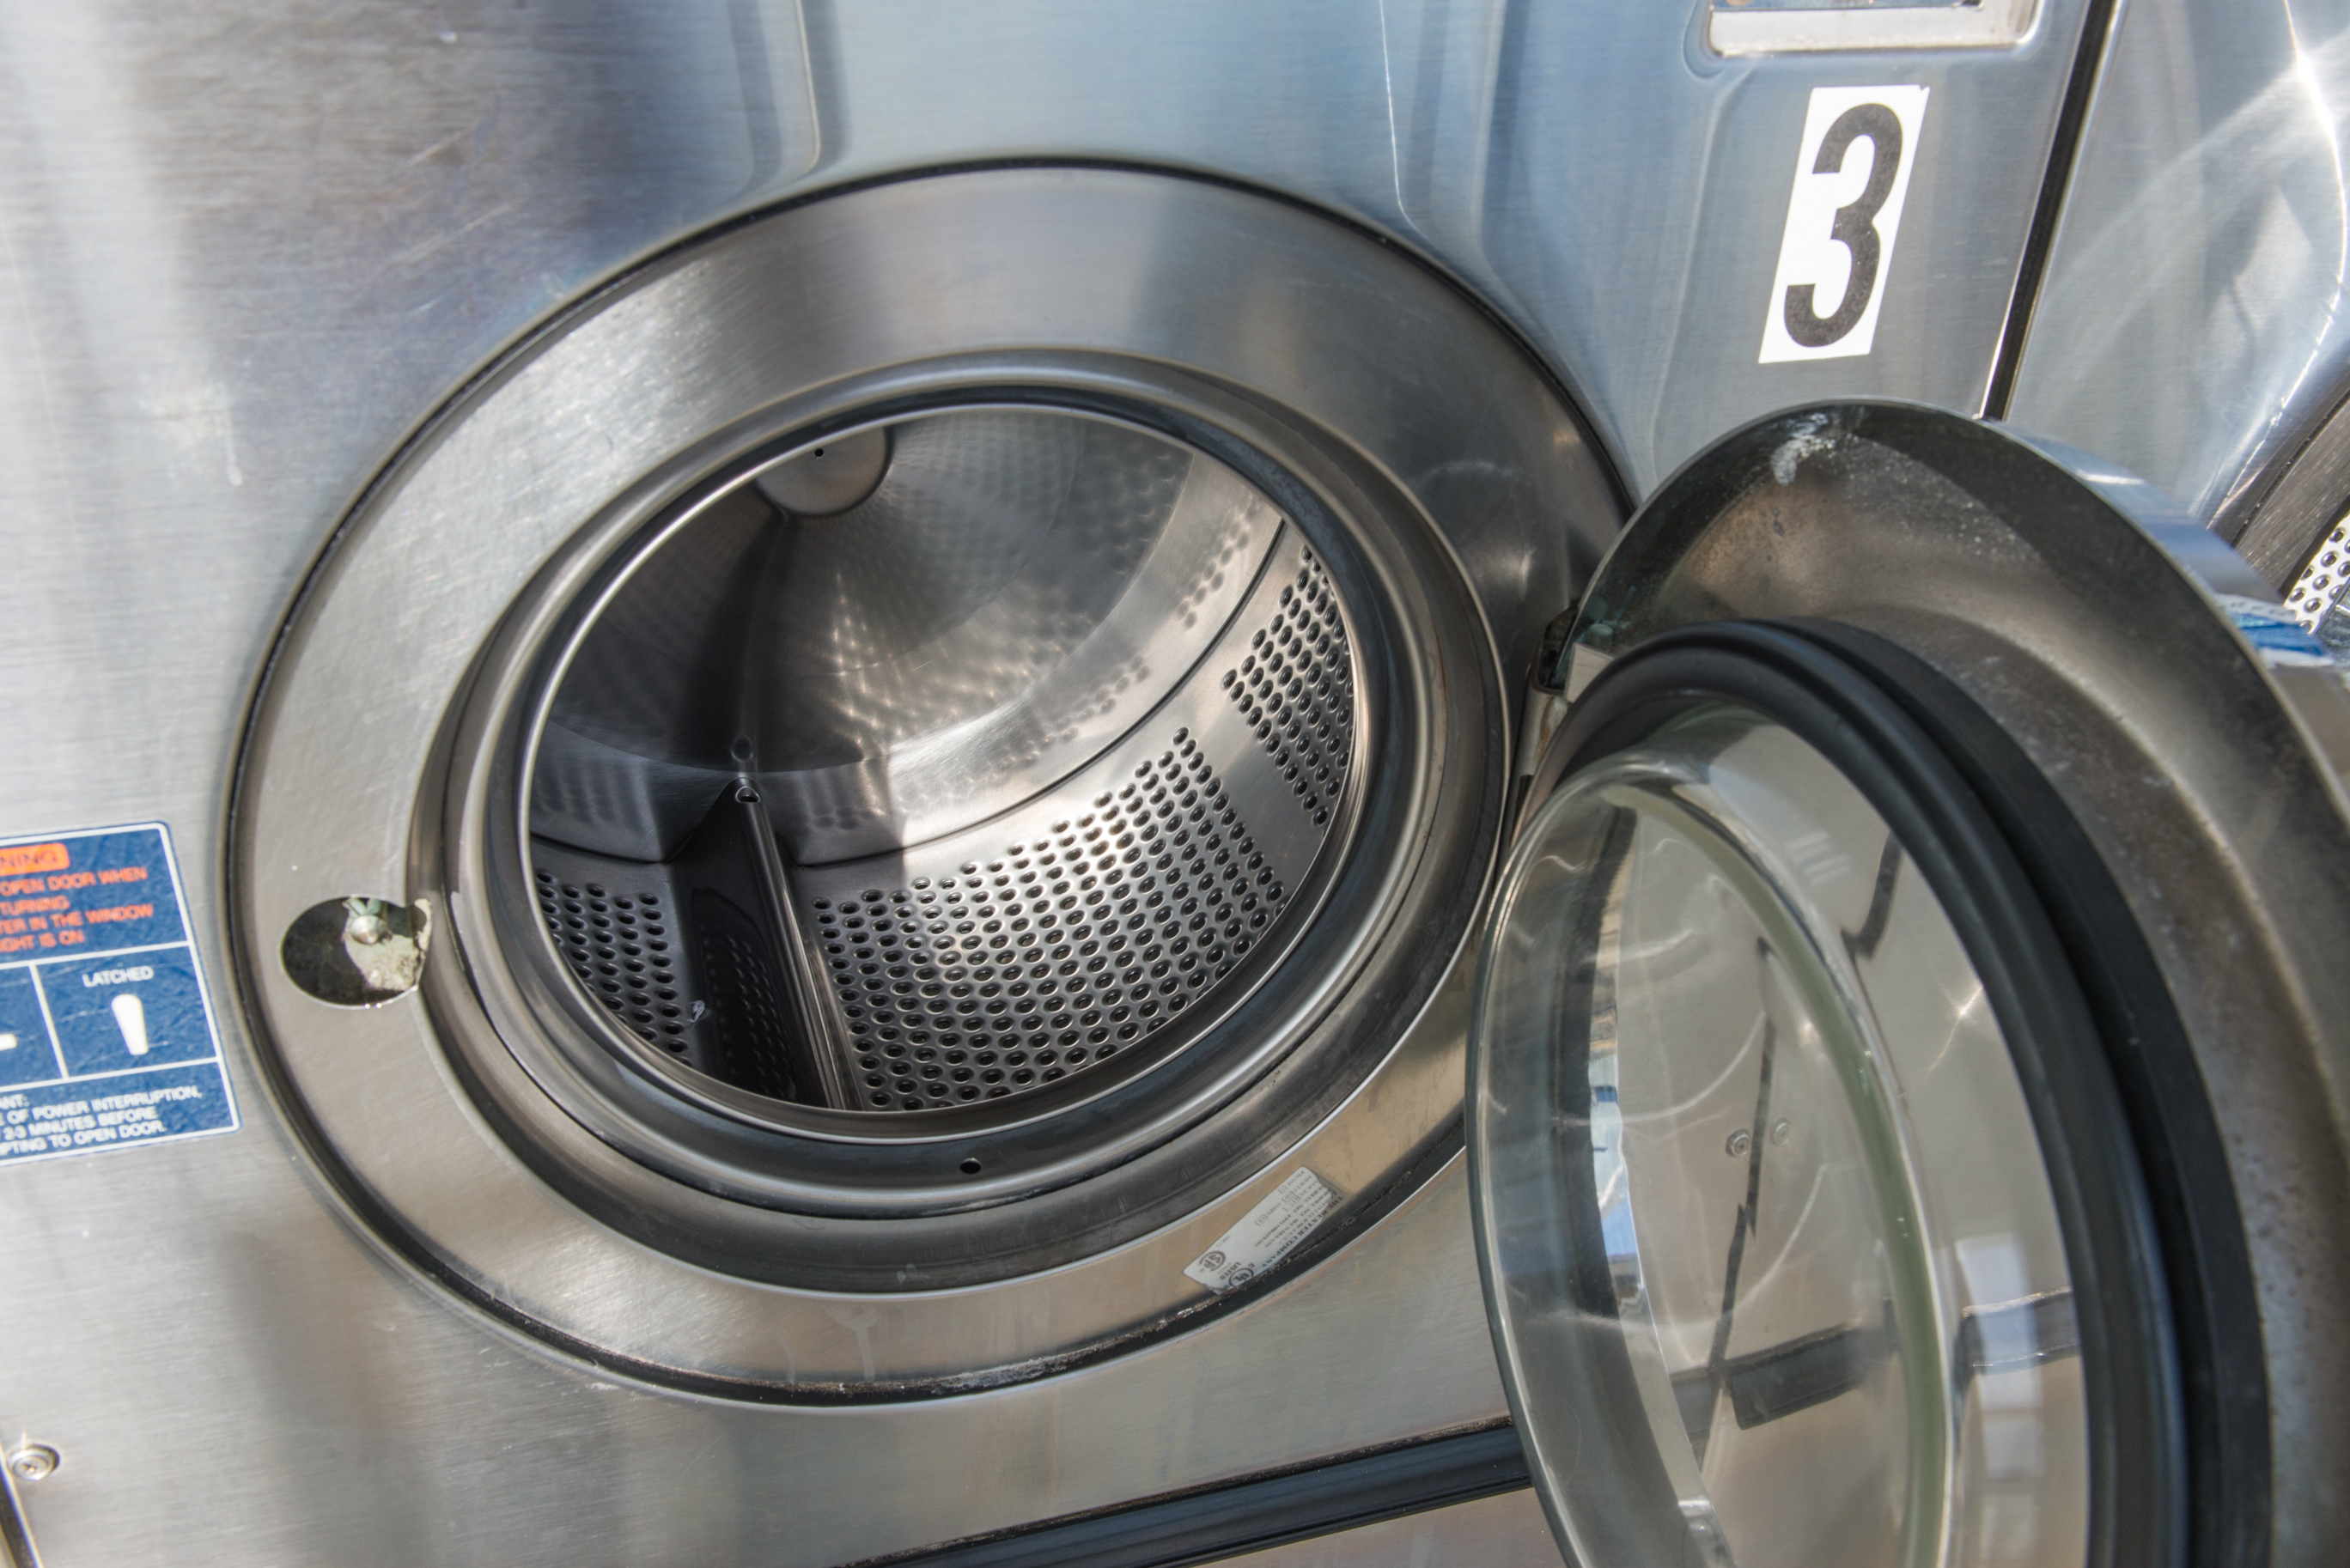 Business of industrial laundry machines in launderette store